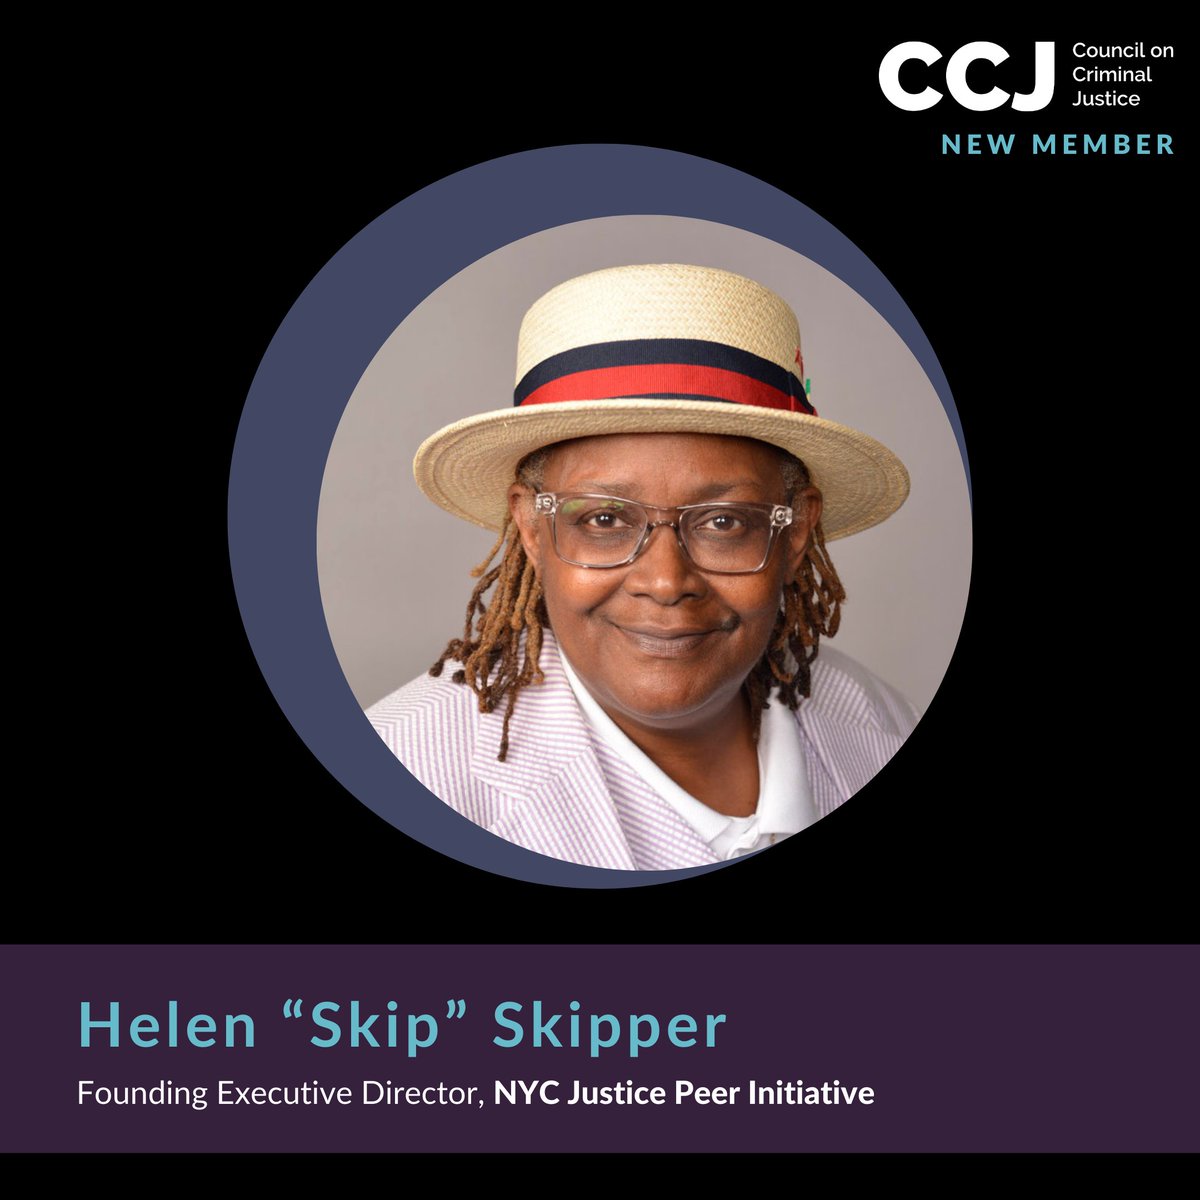 Congratulations to Helen Skipper (@JusticePeerSkip) of the New York Justice Peer Initiative on her election as a Council member.